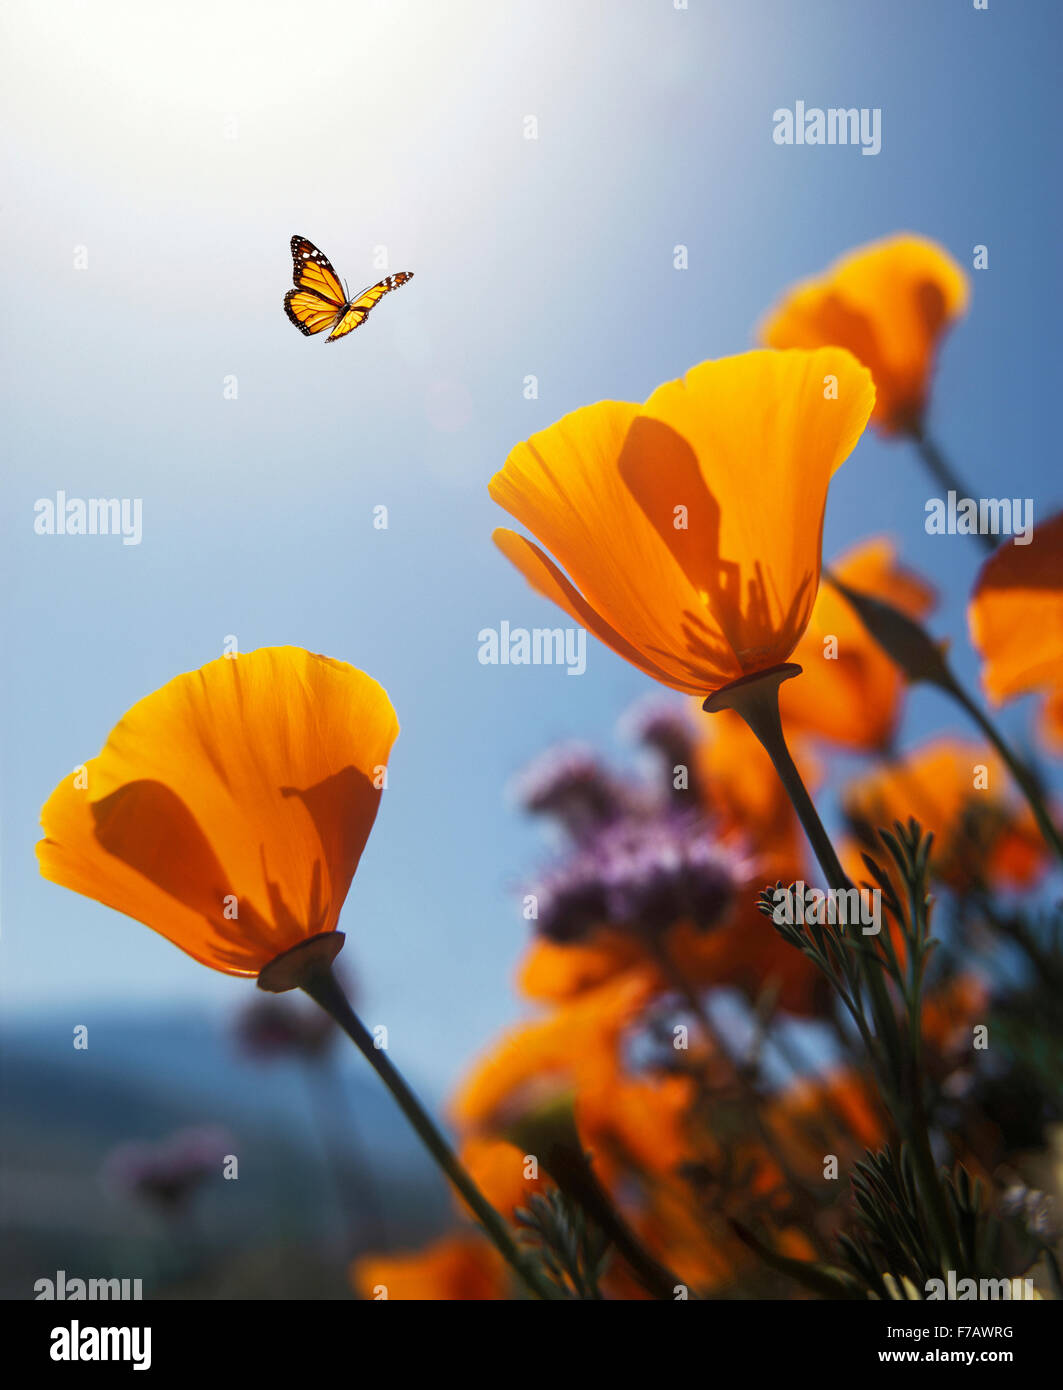 California, Monarch Butterfly with poppy Flower Stock Photo